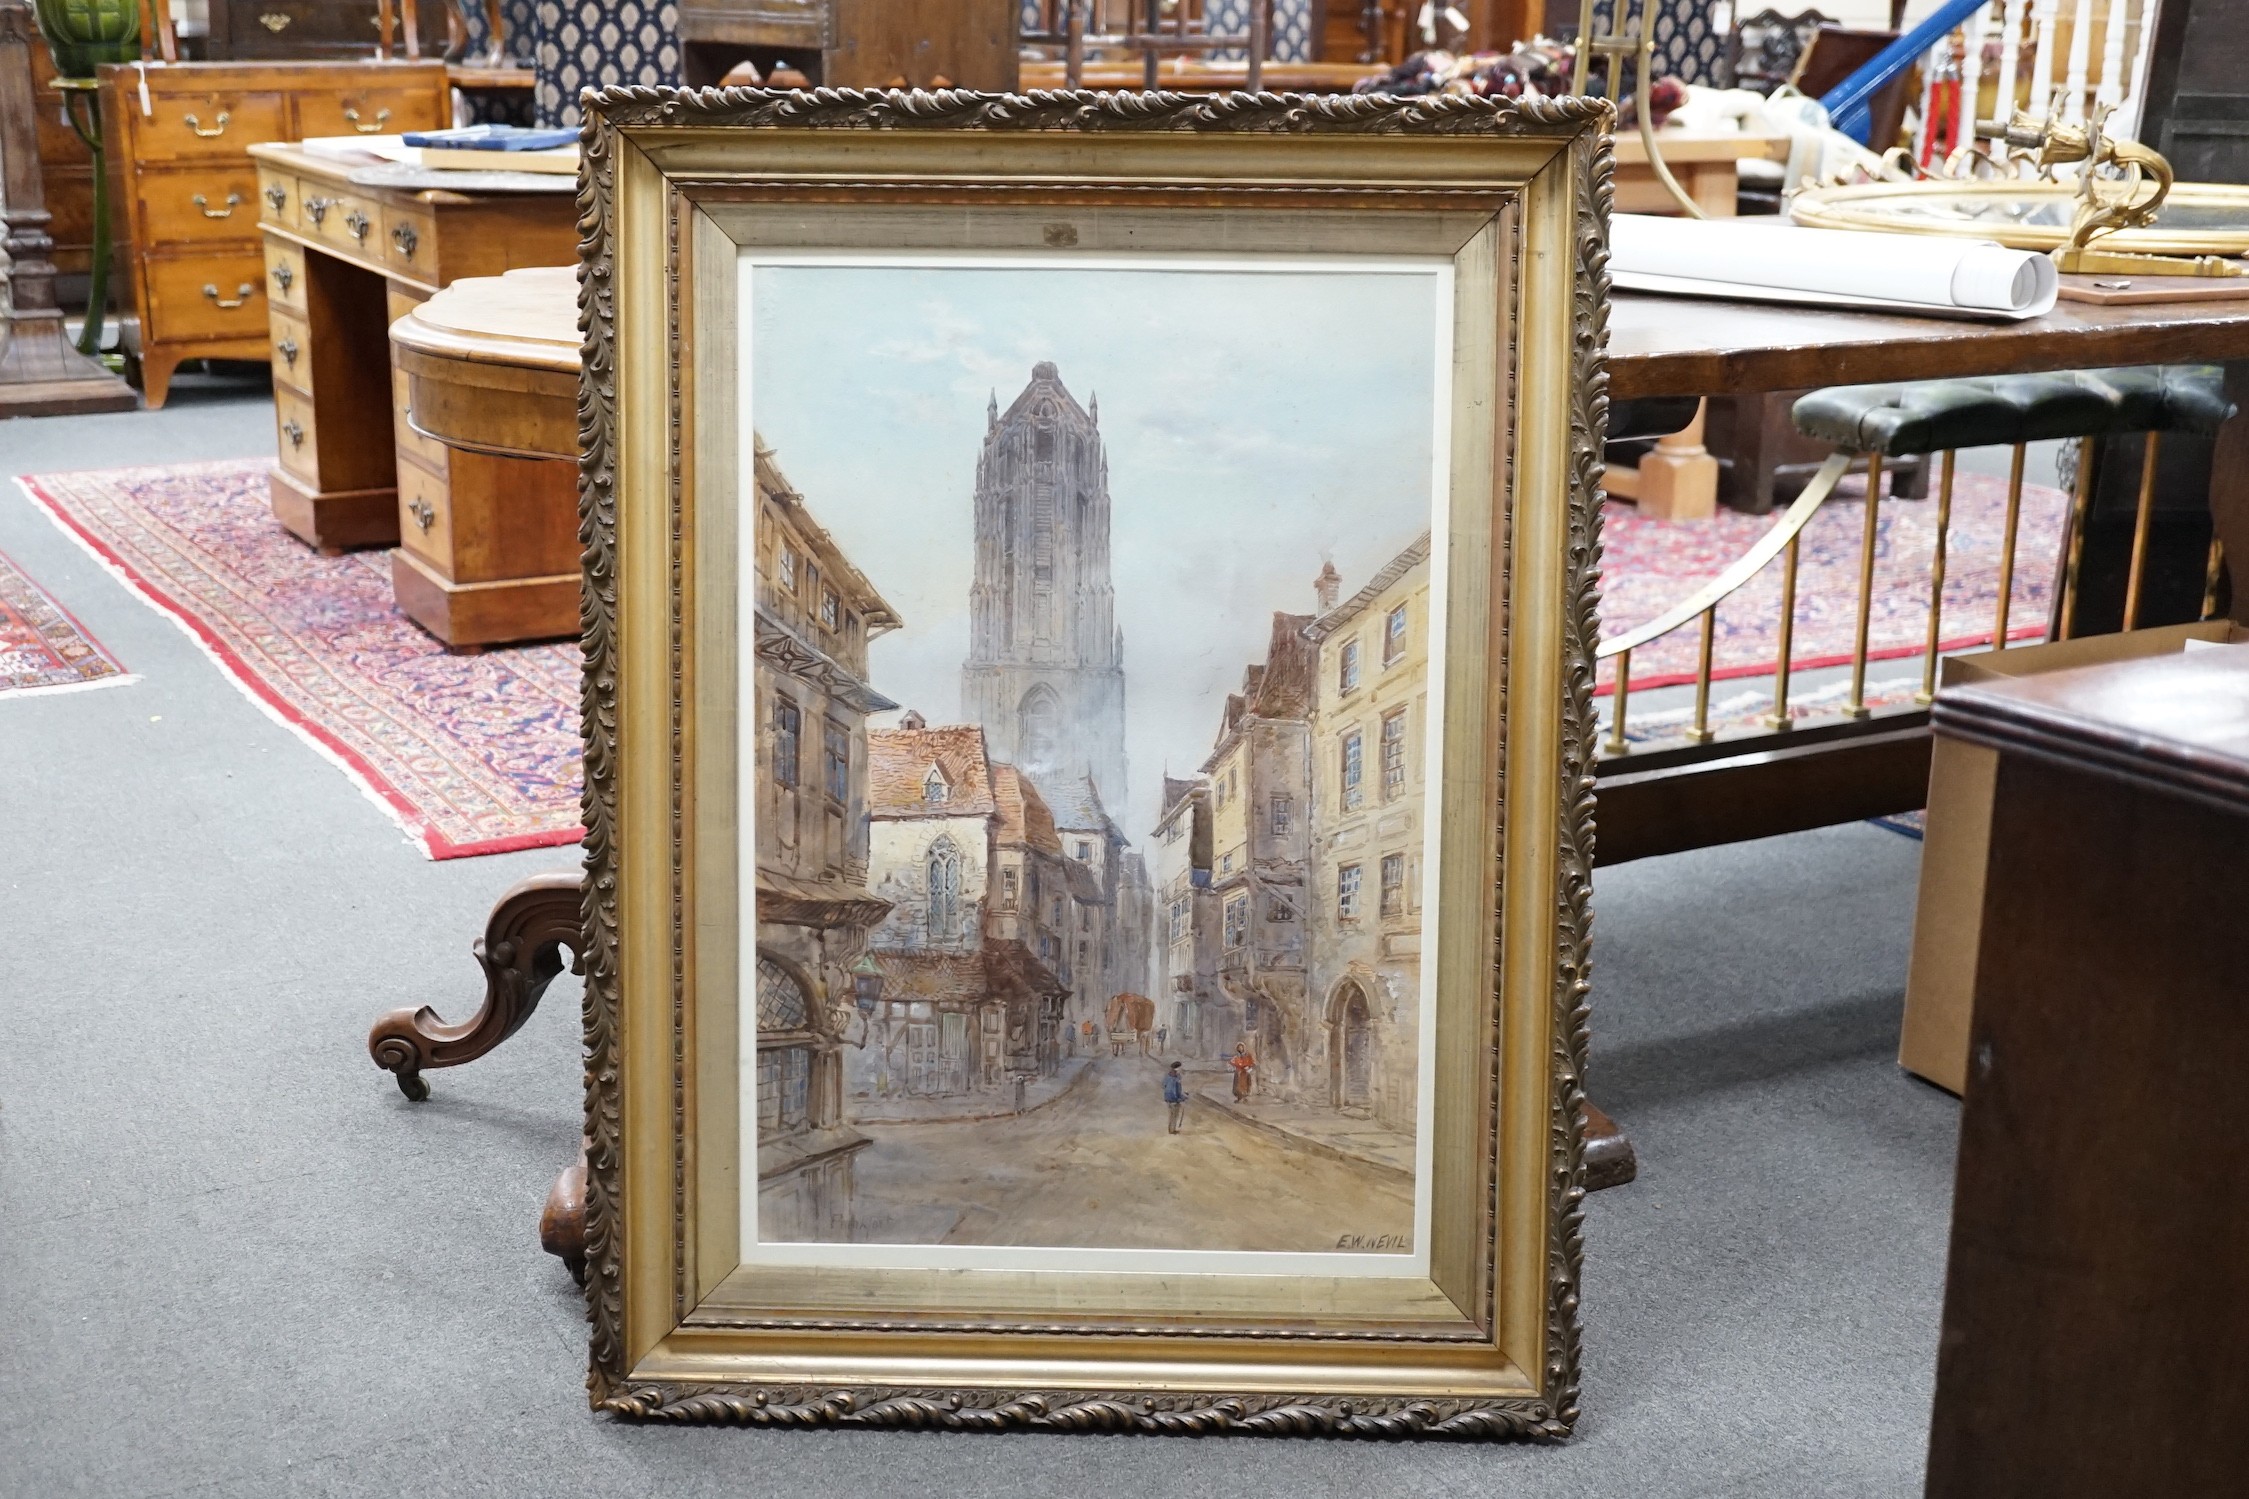 E. W. Nevil, pair of watercolours, 'Frankfort' and 'Huy on The Meuse', signed and titled, 75 x 48cm